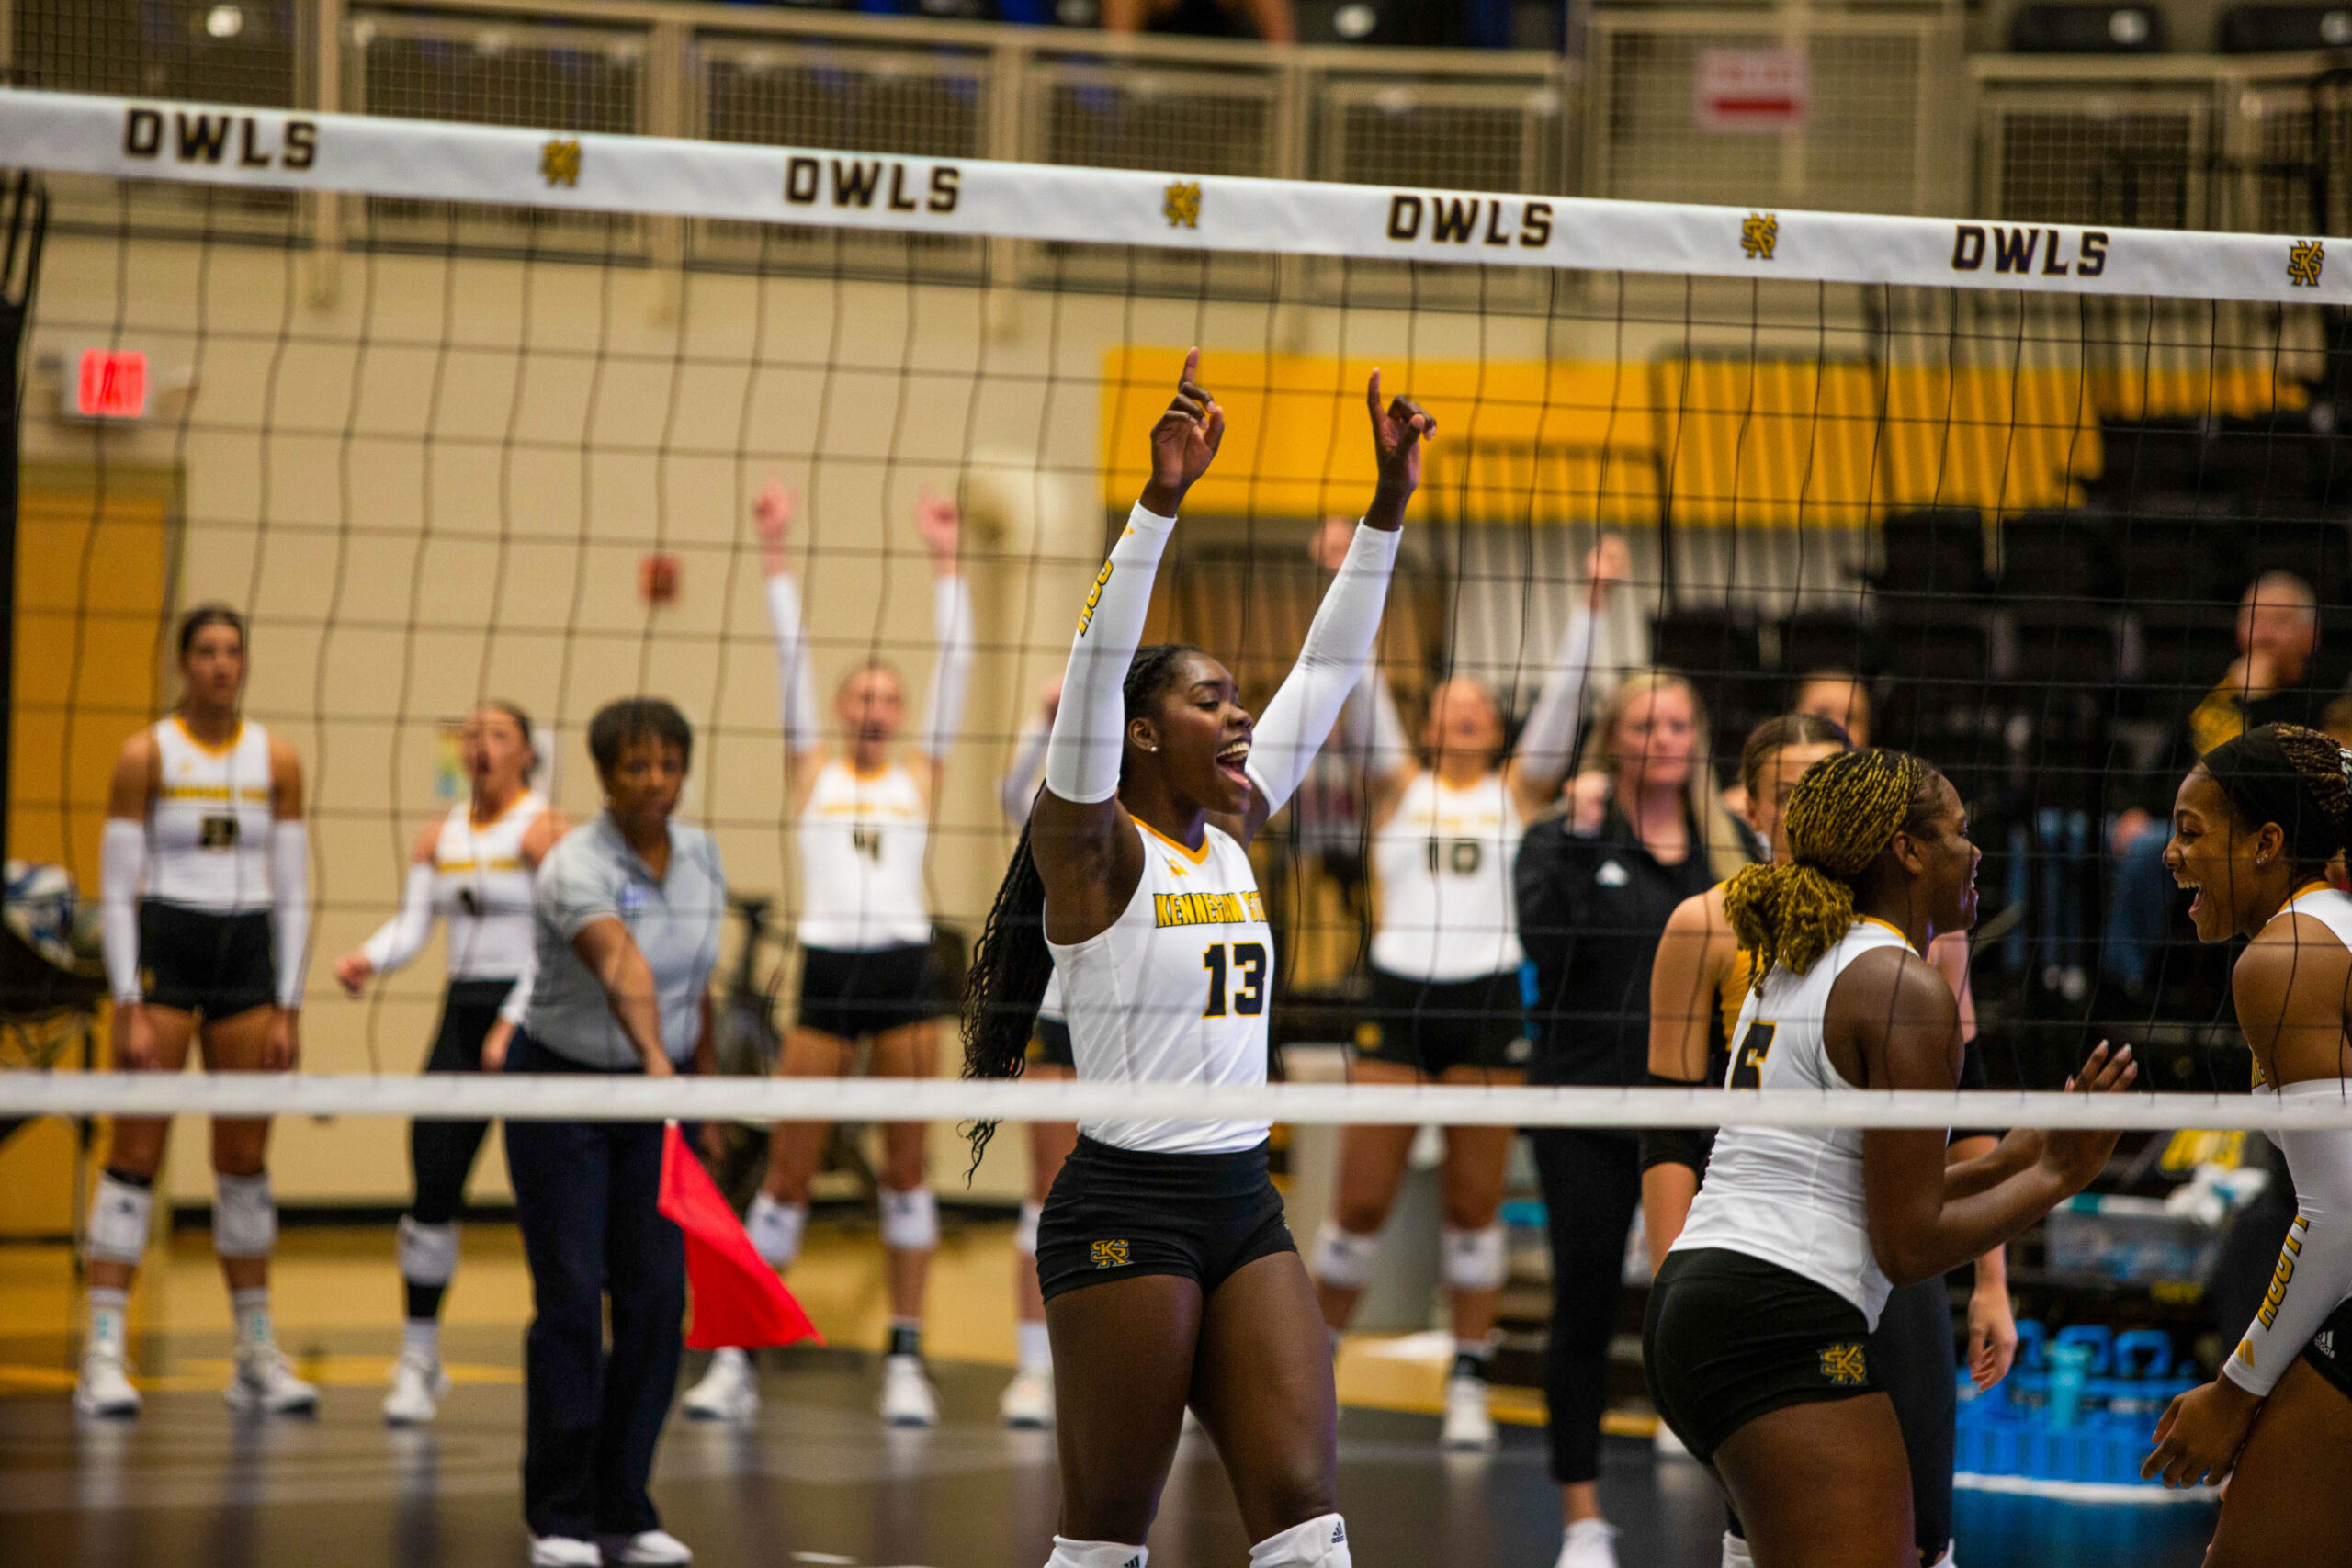 The Kennesaw State girls volleyball team continues their winning streak after defeating North Alabama University on Friday, Oct. 13.